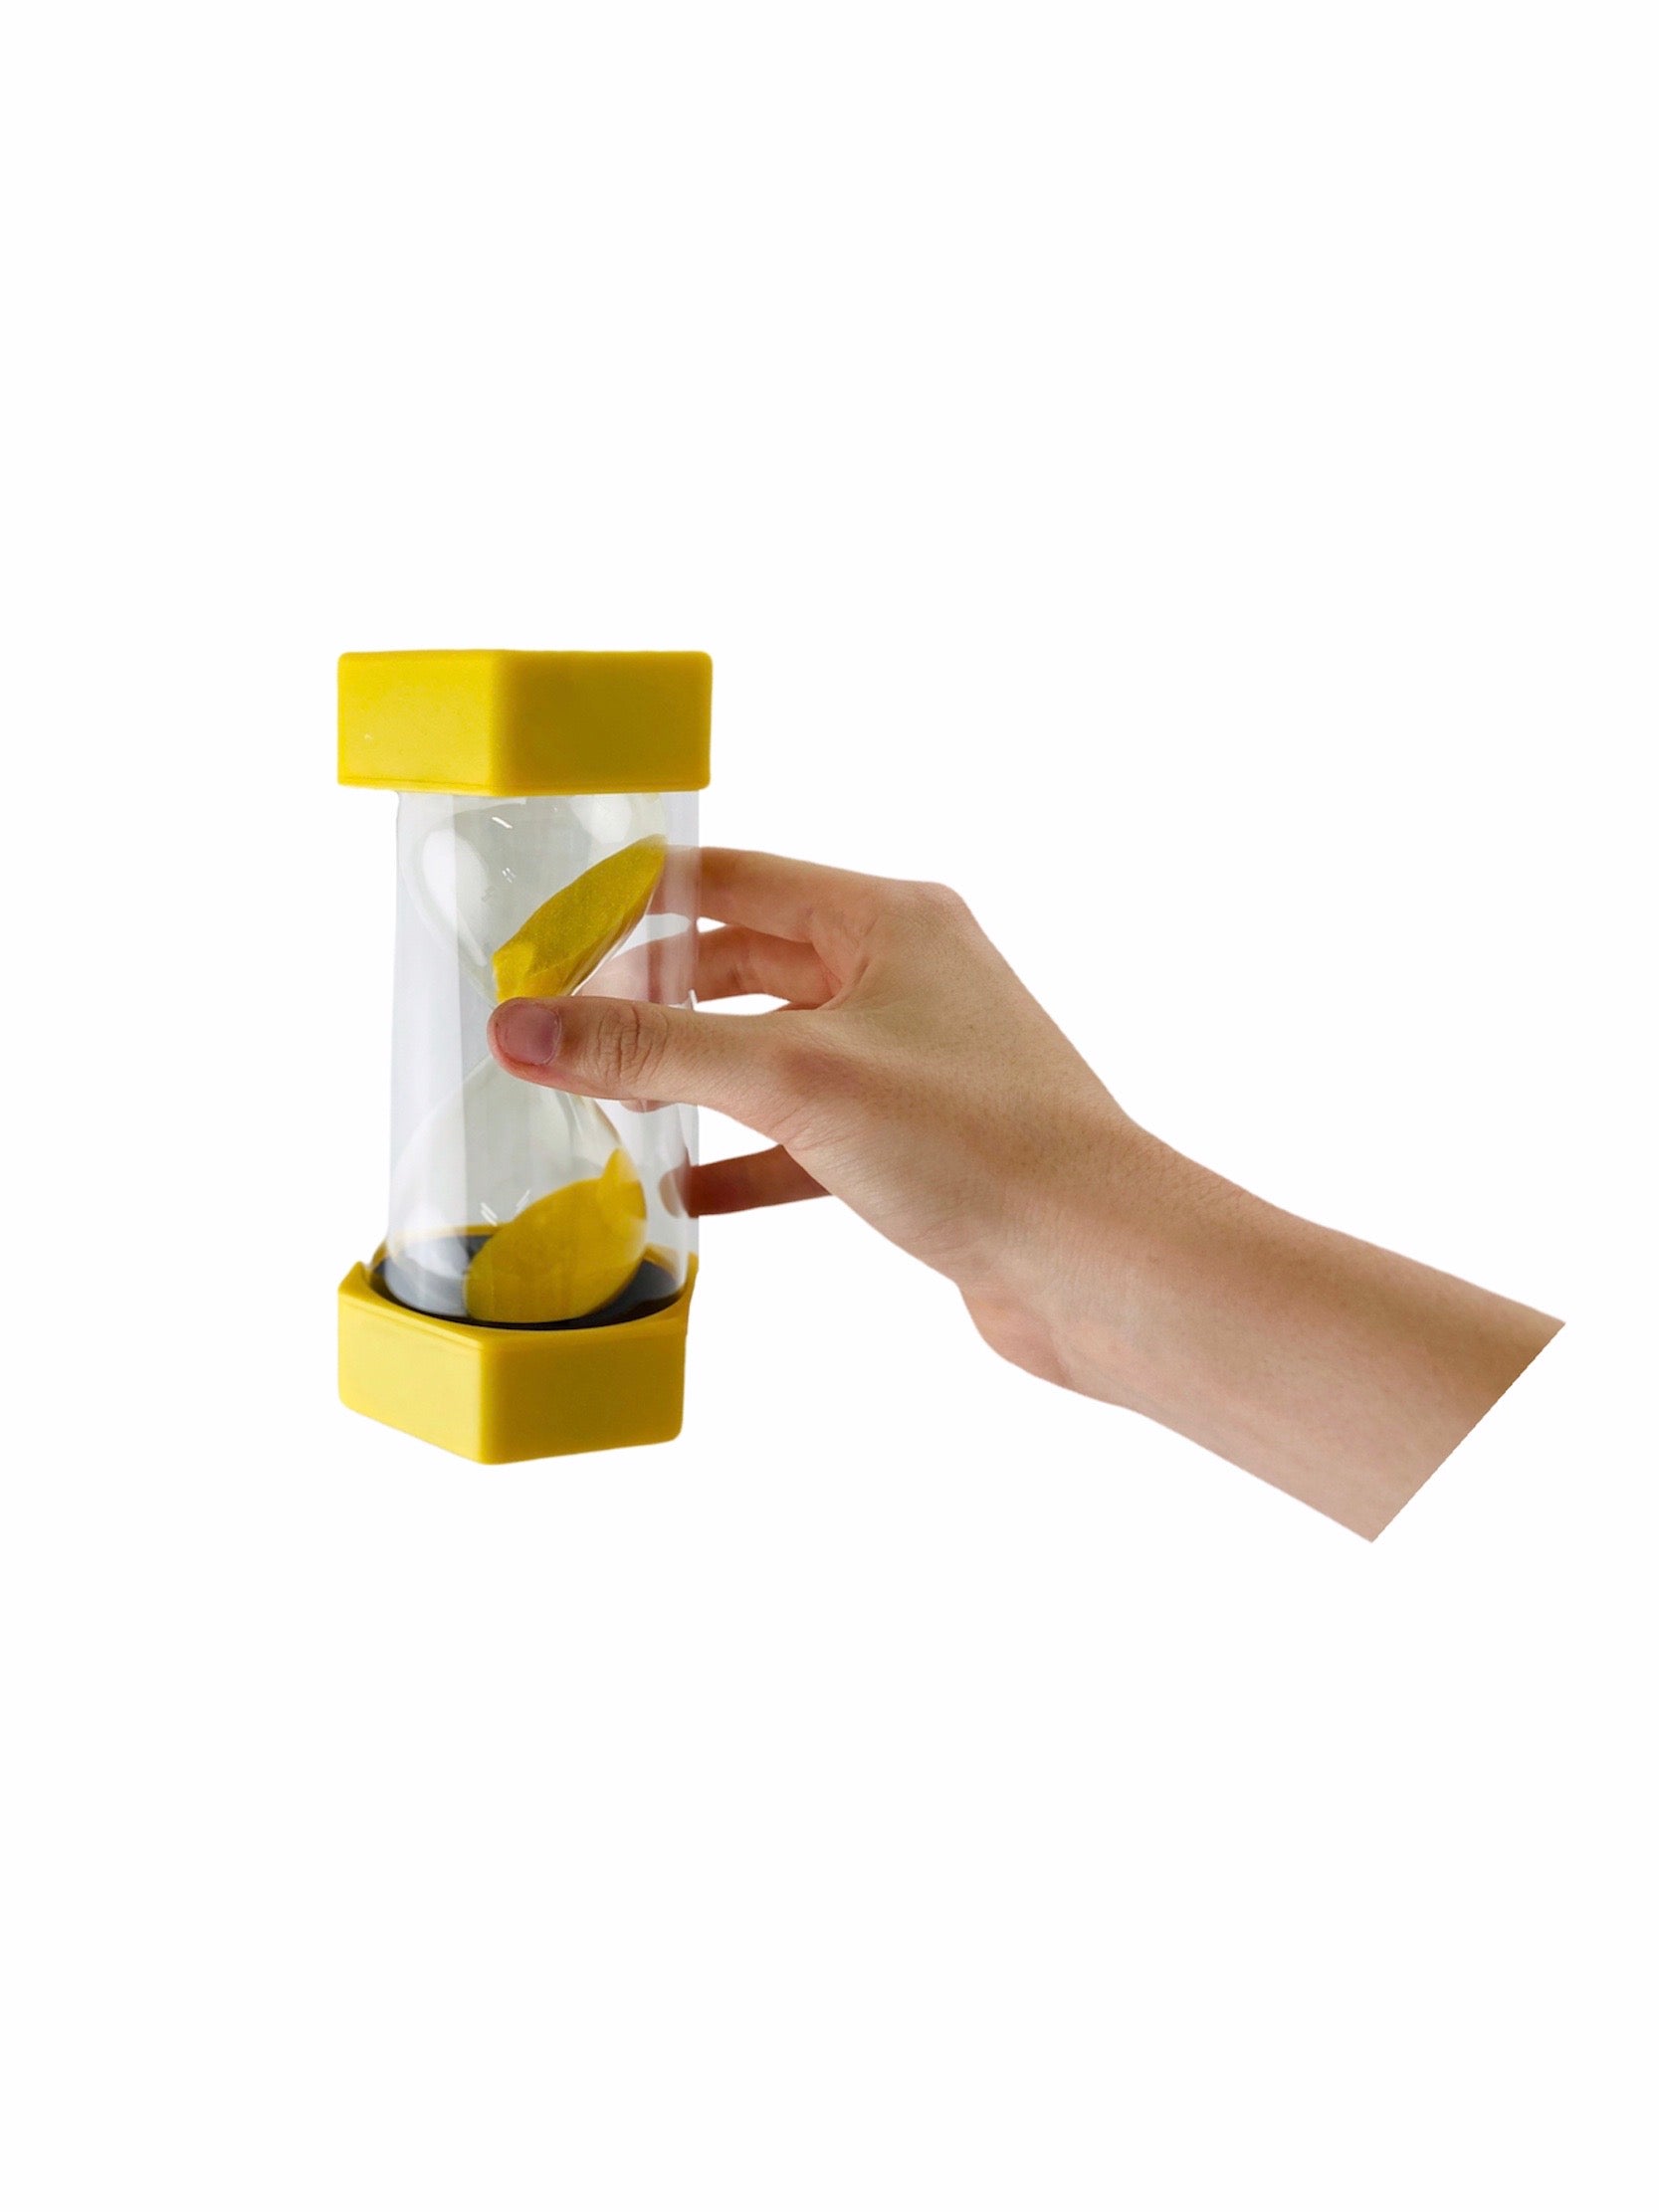 Hand holding Giant Yellow 3 minute sand timer on white background